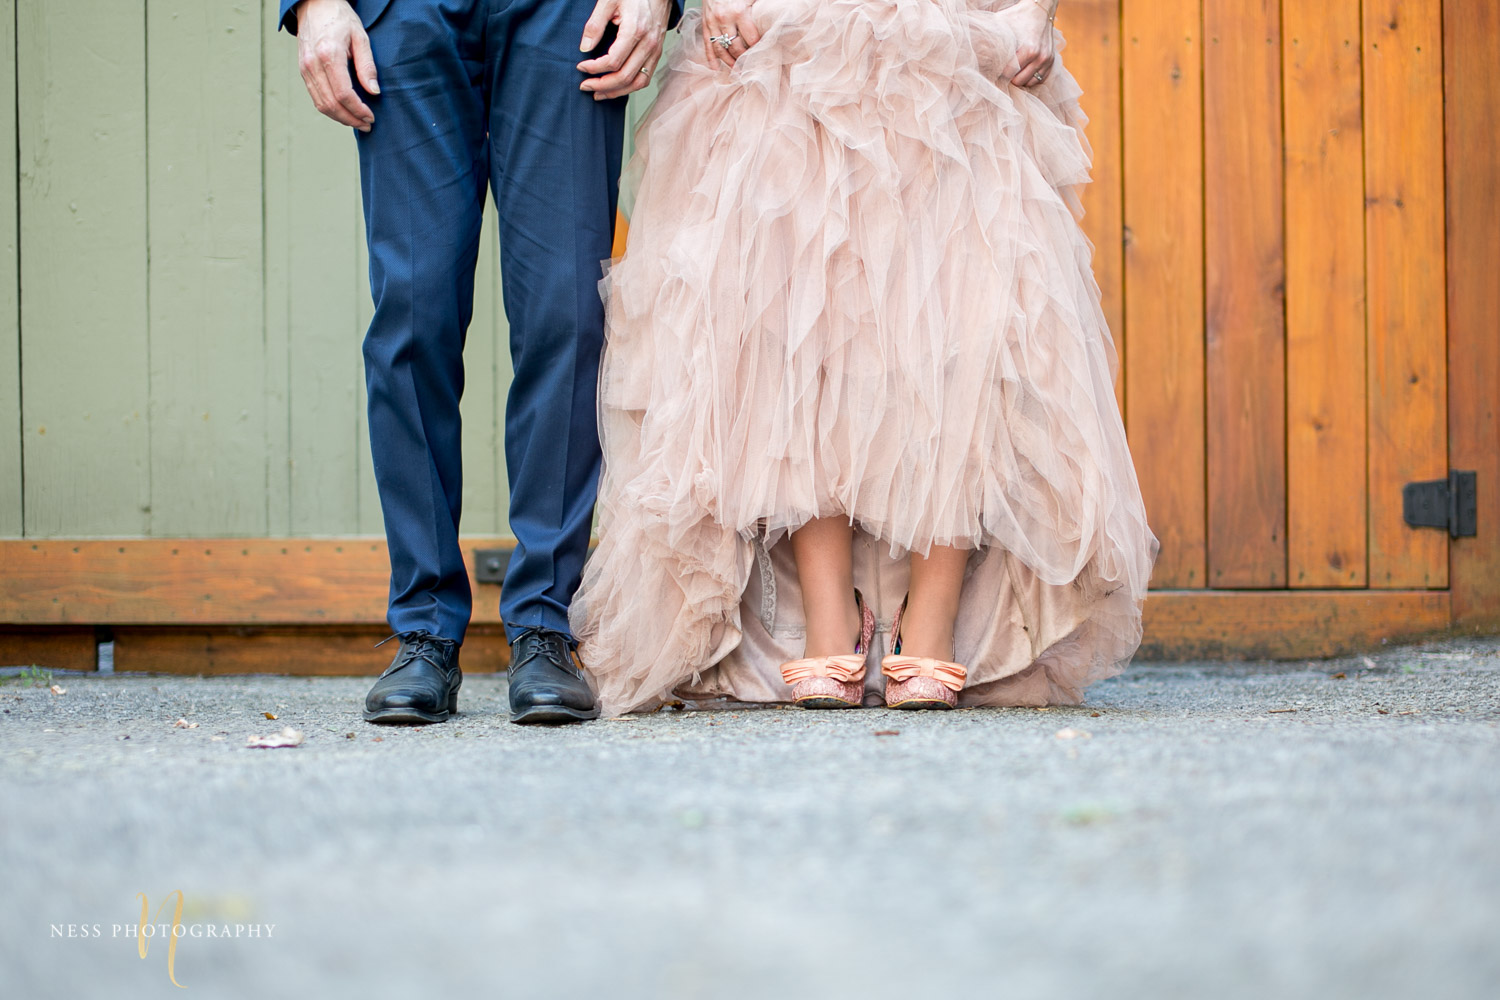 bride and groom shoes during elopement wedding photos in plateau mont royal